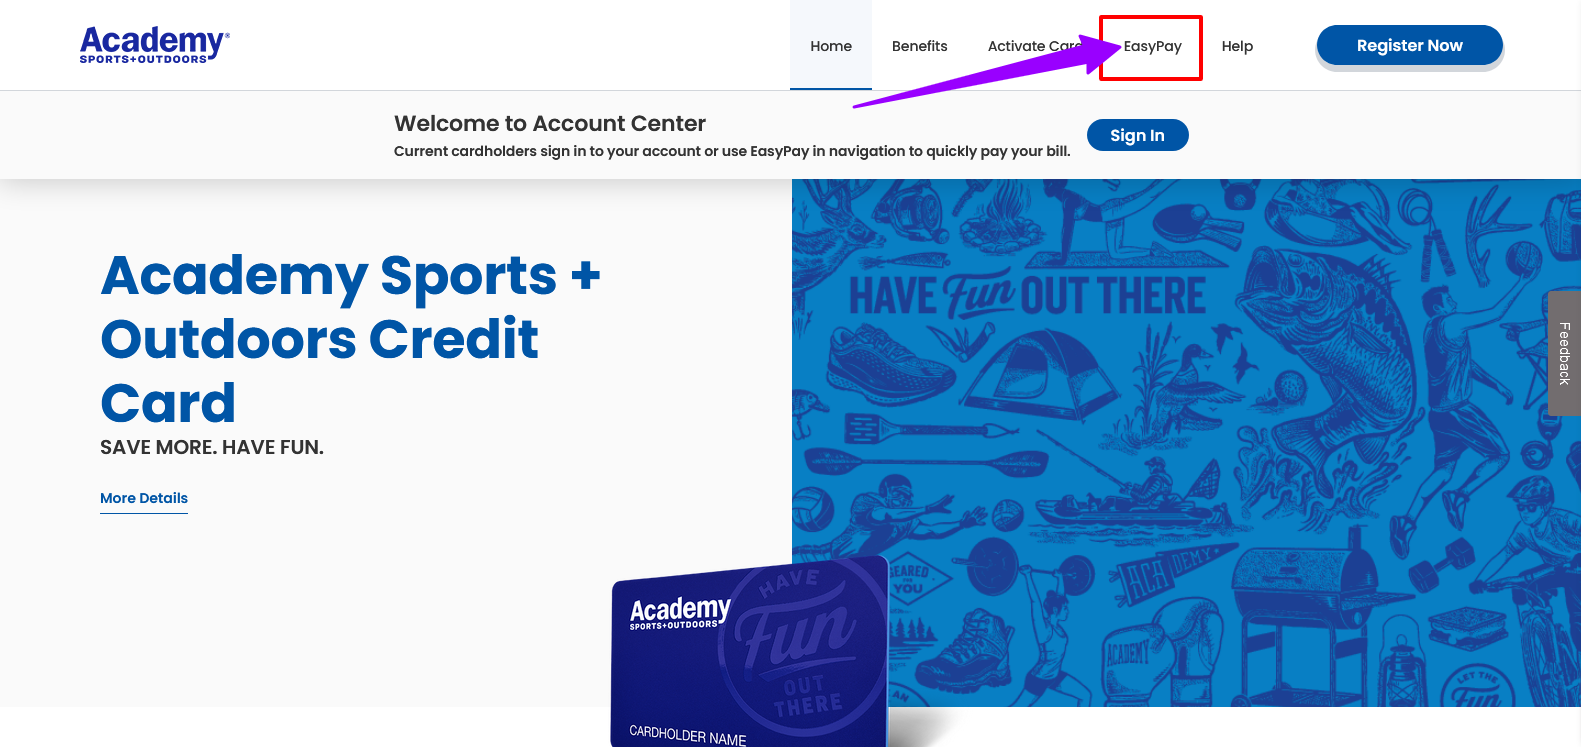 How to Pay Academy Credit Card Bill Payment with EasyPay